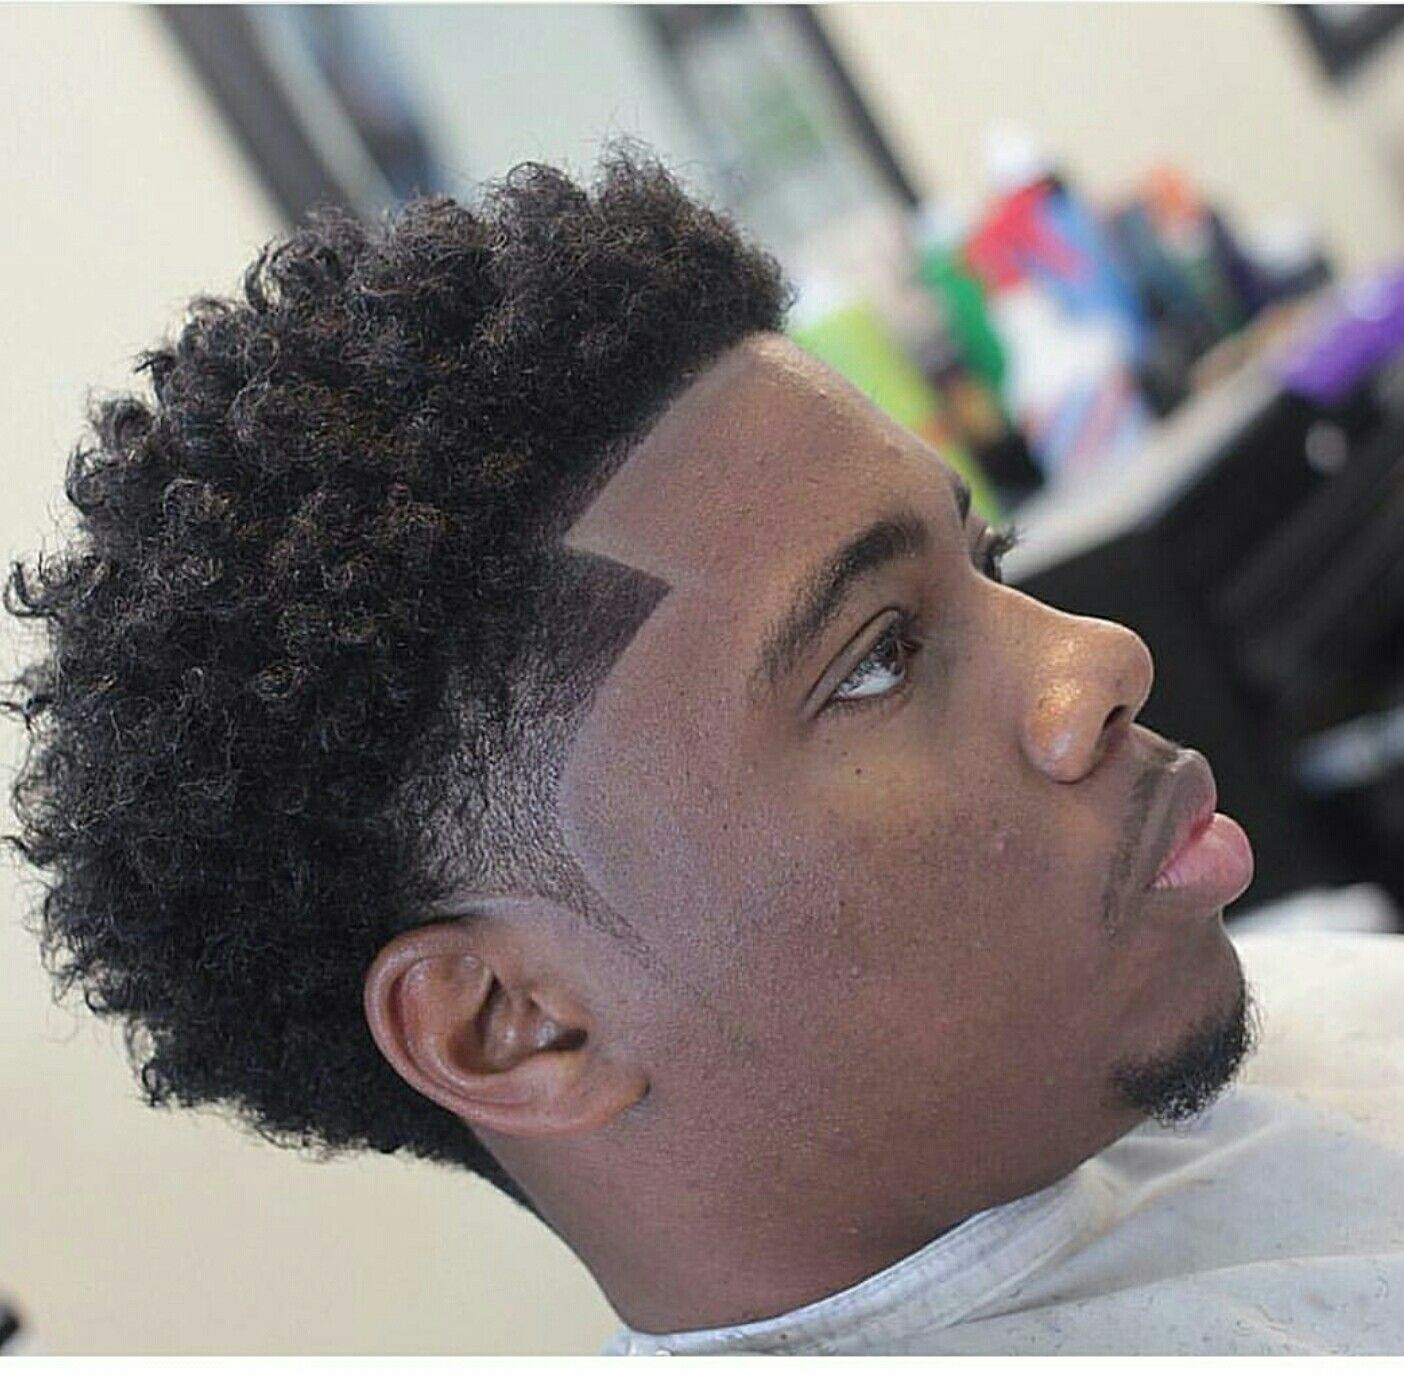 Pin By Vernon Warren Jr. On Hair Goals &amp; Products | Hair And Beard dedans Taper Cheveux Lisses